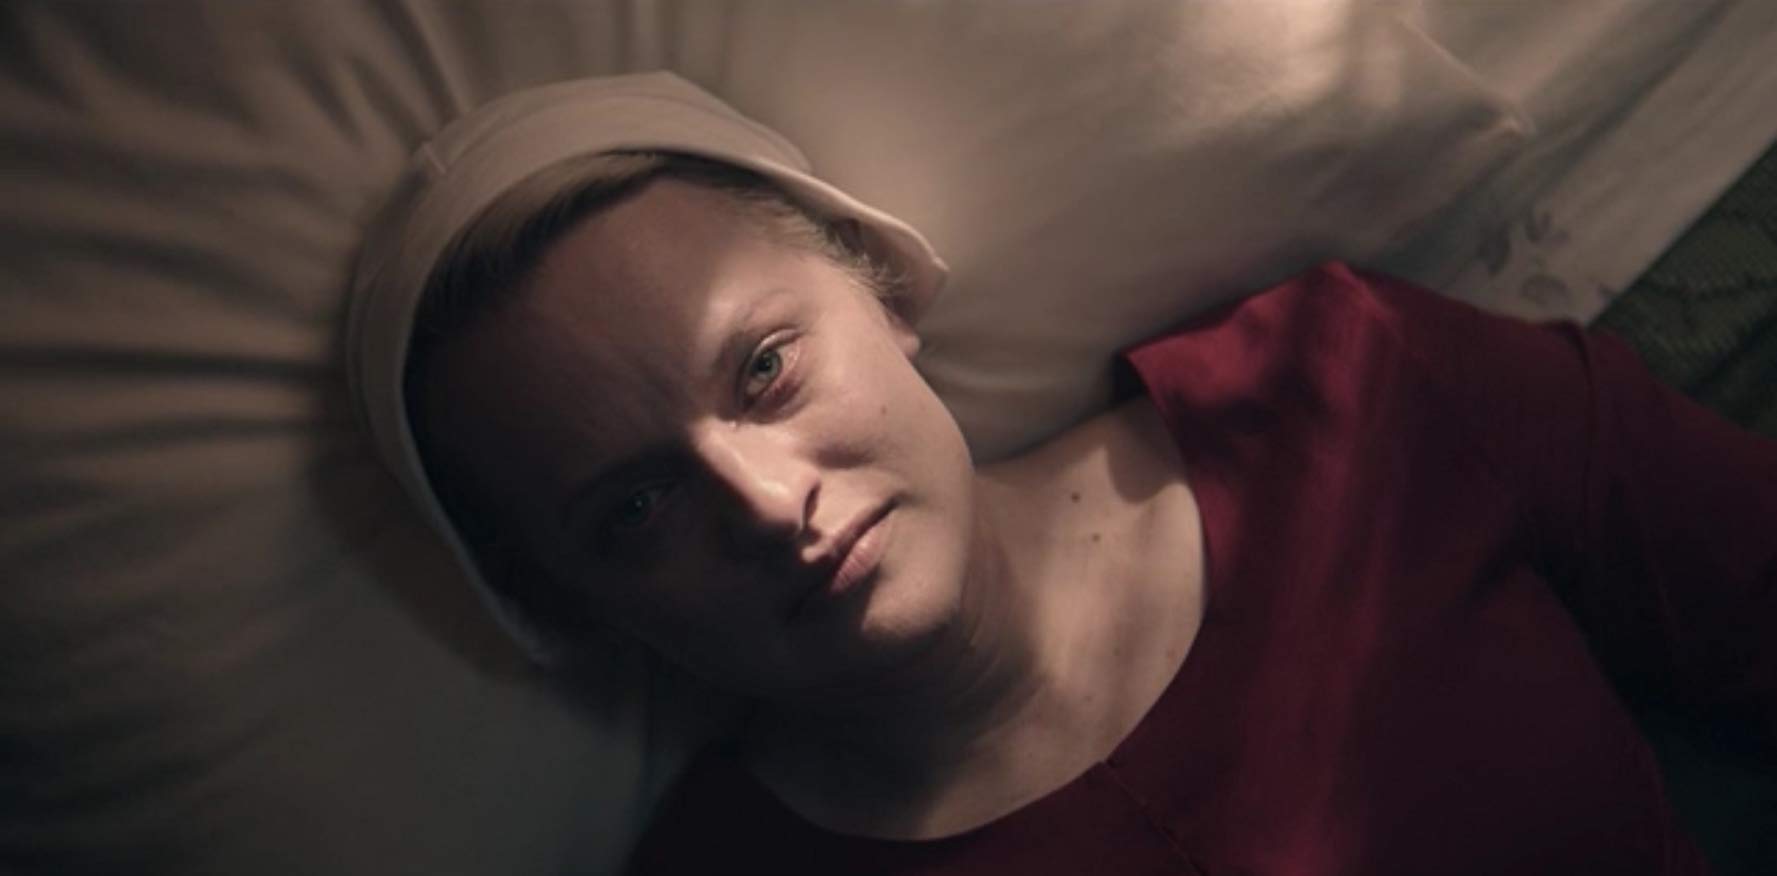 Geek insider, geekinsider, geekinsider. Com,, 'the handmaid's tale' turns life upside down (yet again) for three gilead women, entertainment